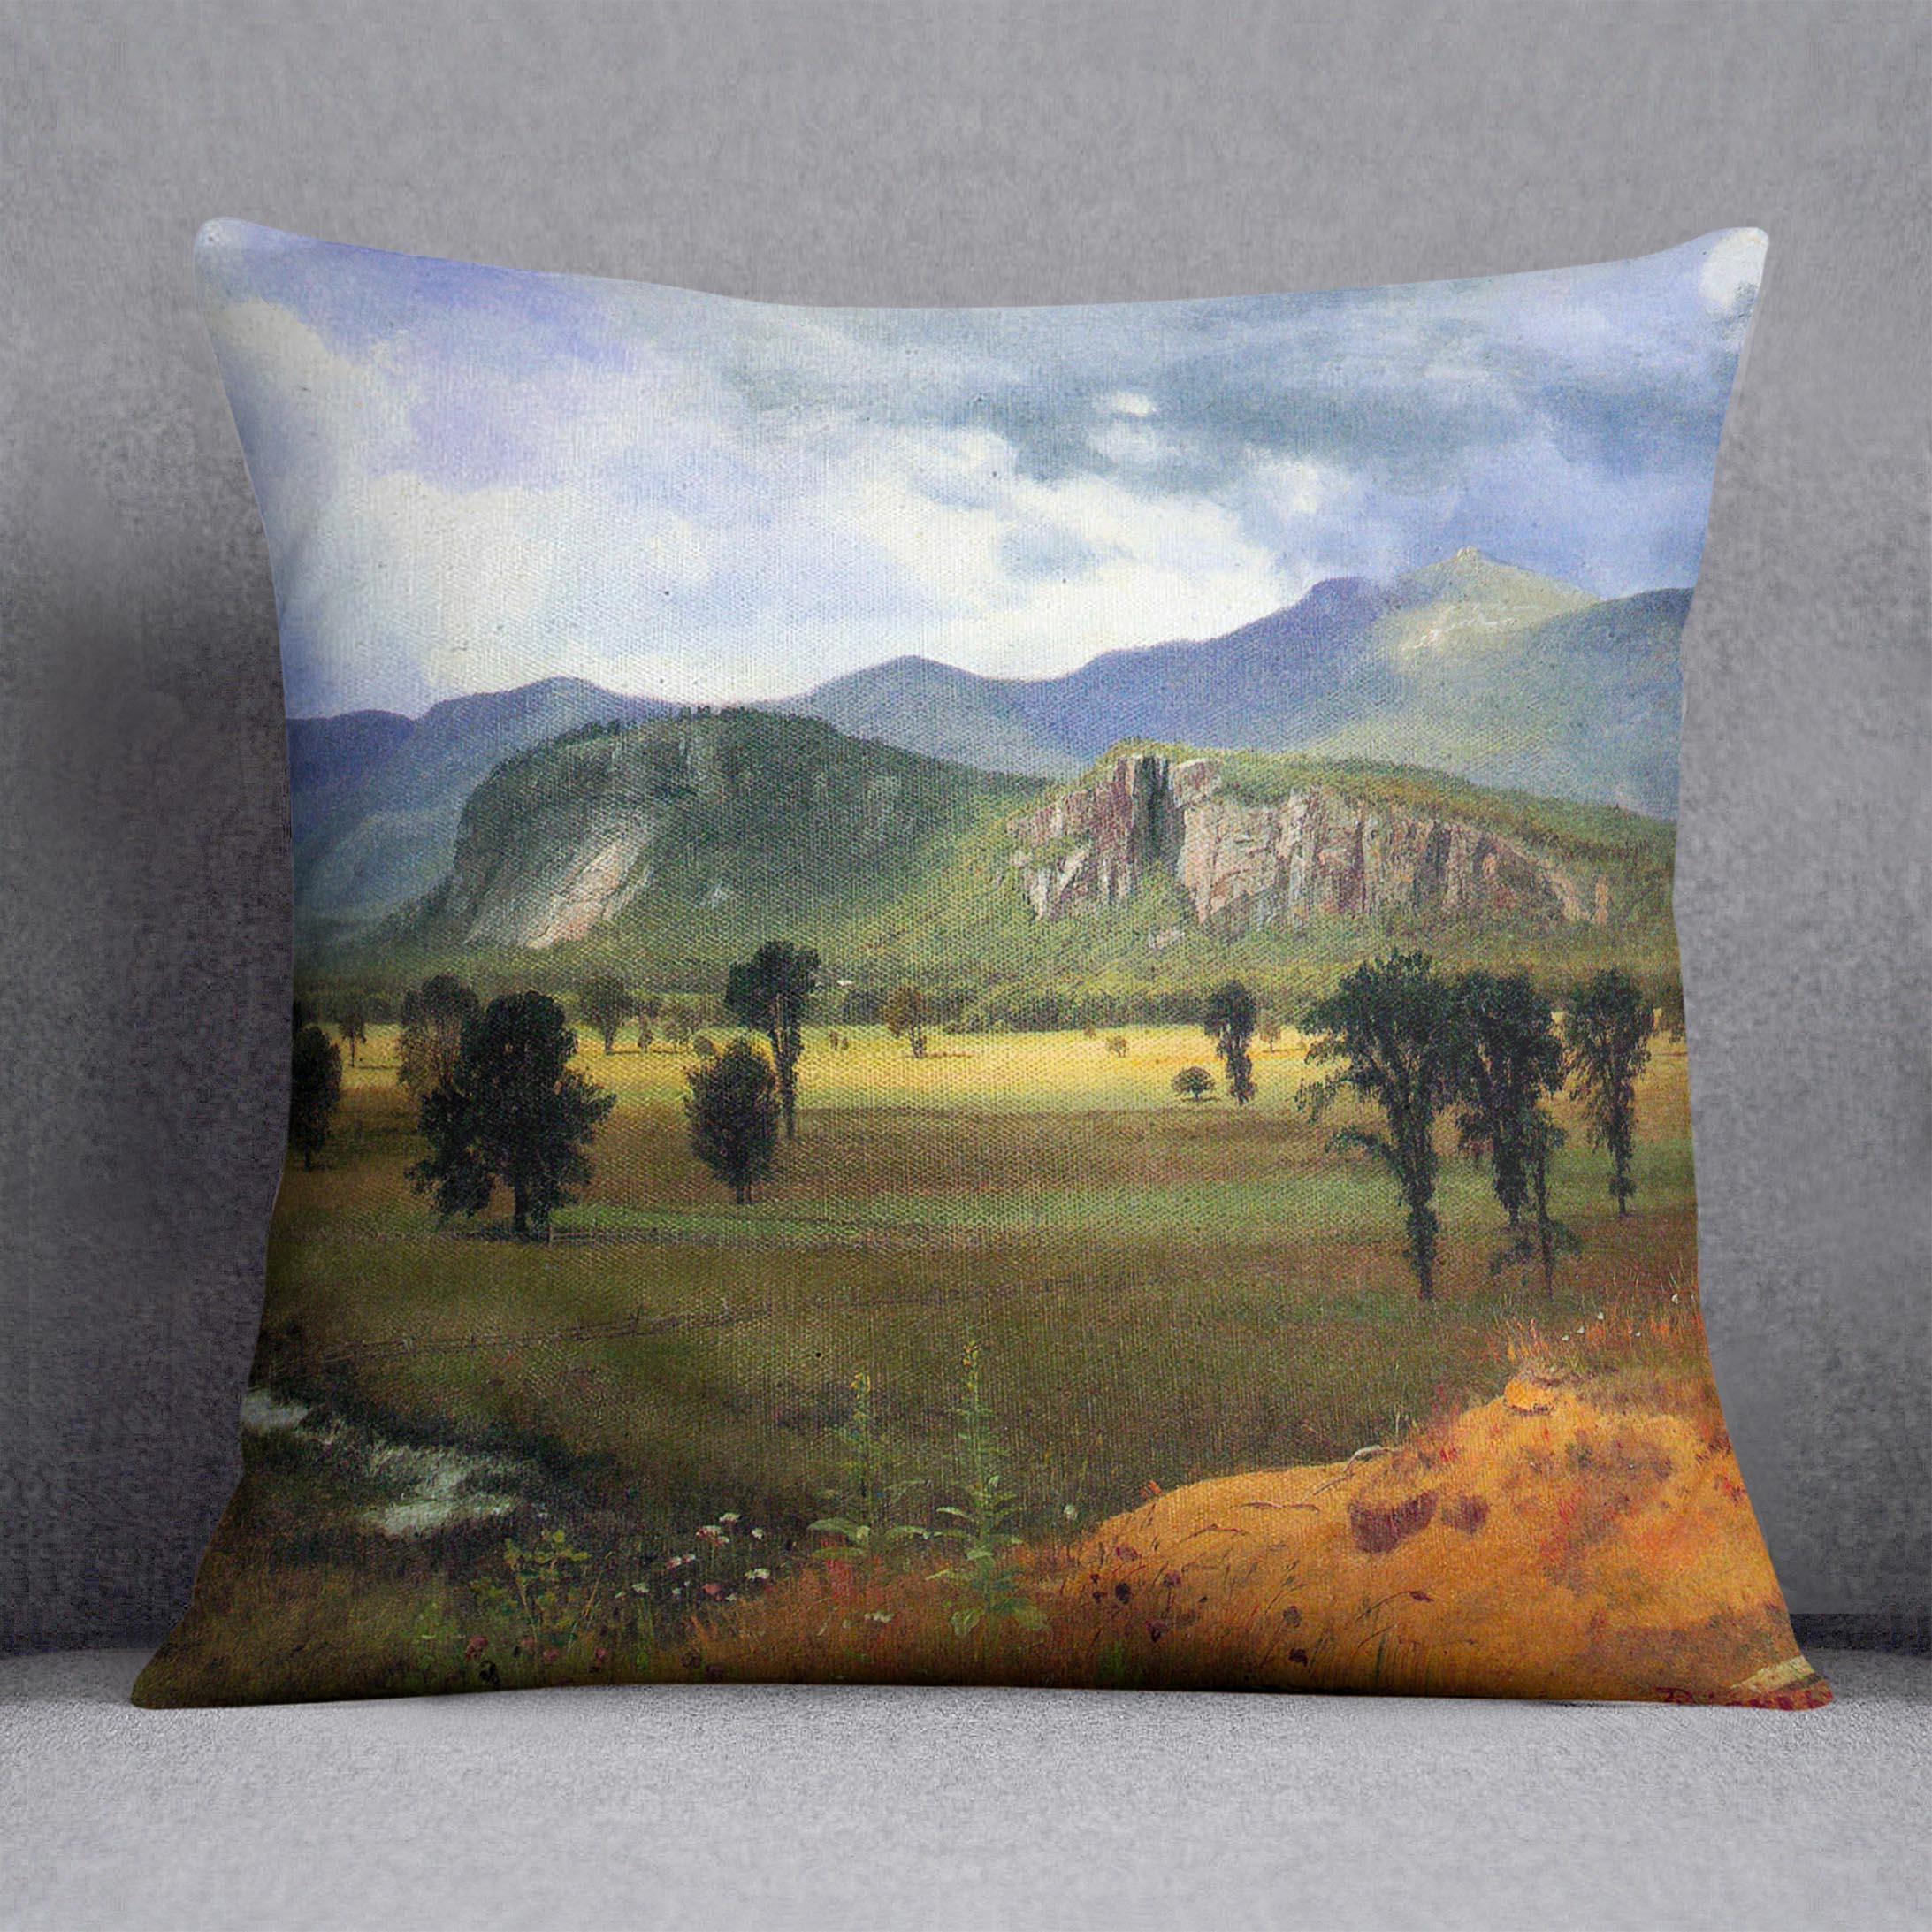 Moat Mountain Intervale New Hampshire by Bierstadt Cushion - Canvas Art Rocks - 1